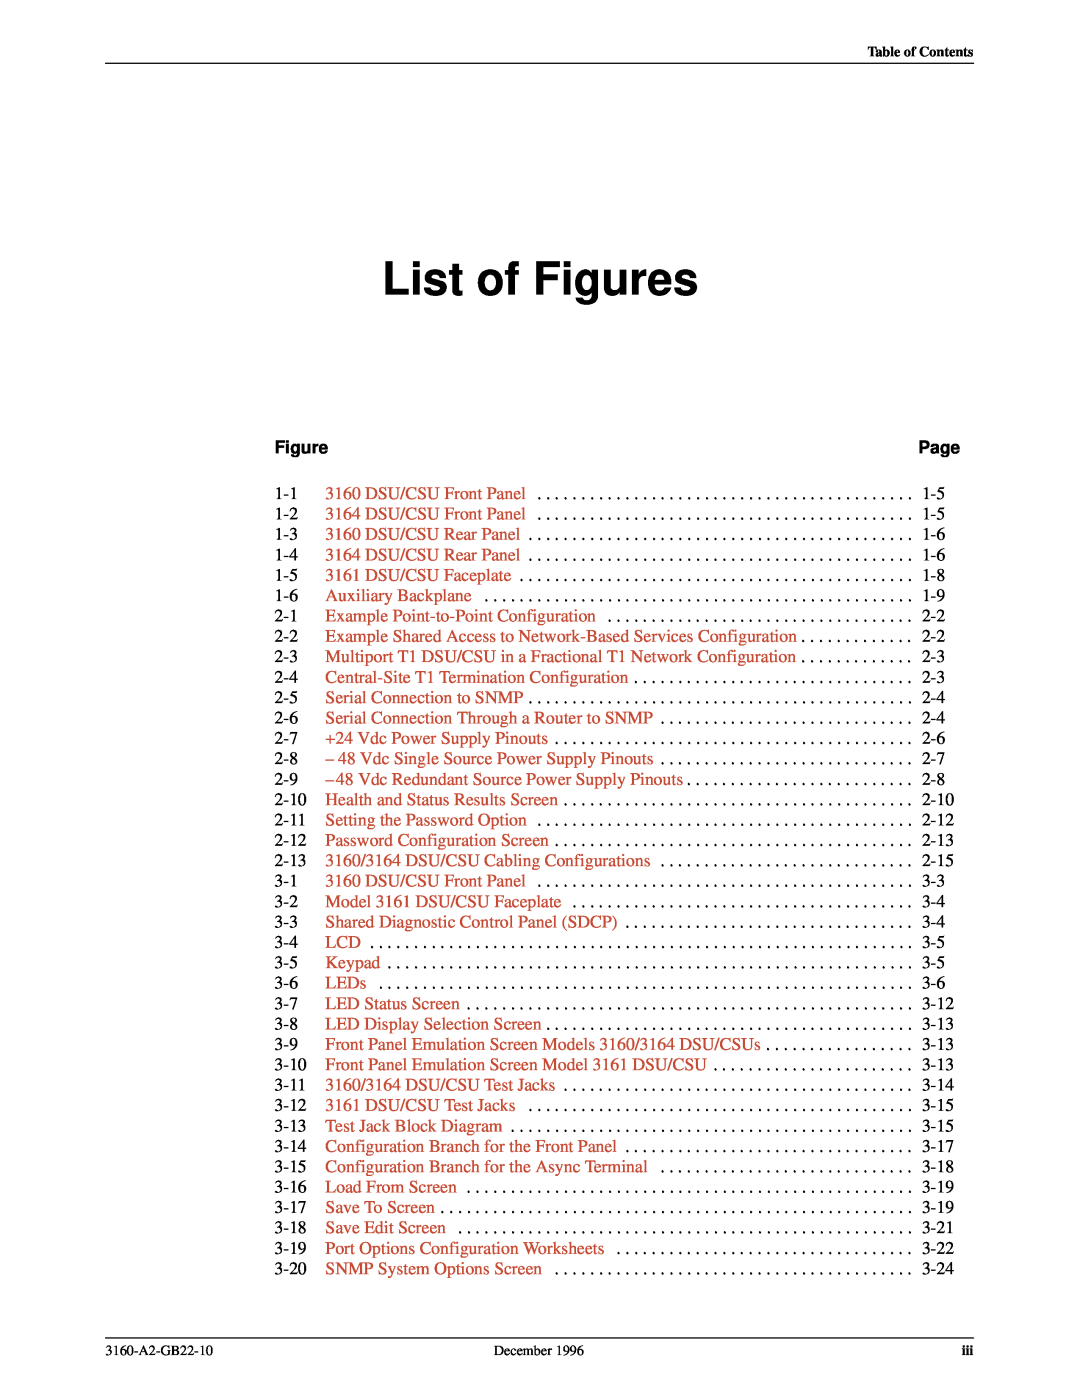 Paradyne 316x manual List of Figures, Example Shared Access to Network-Based Services Configuration 